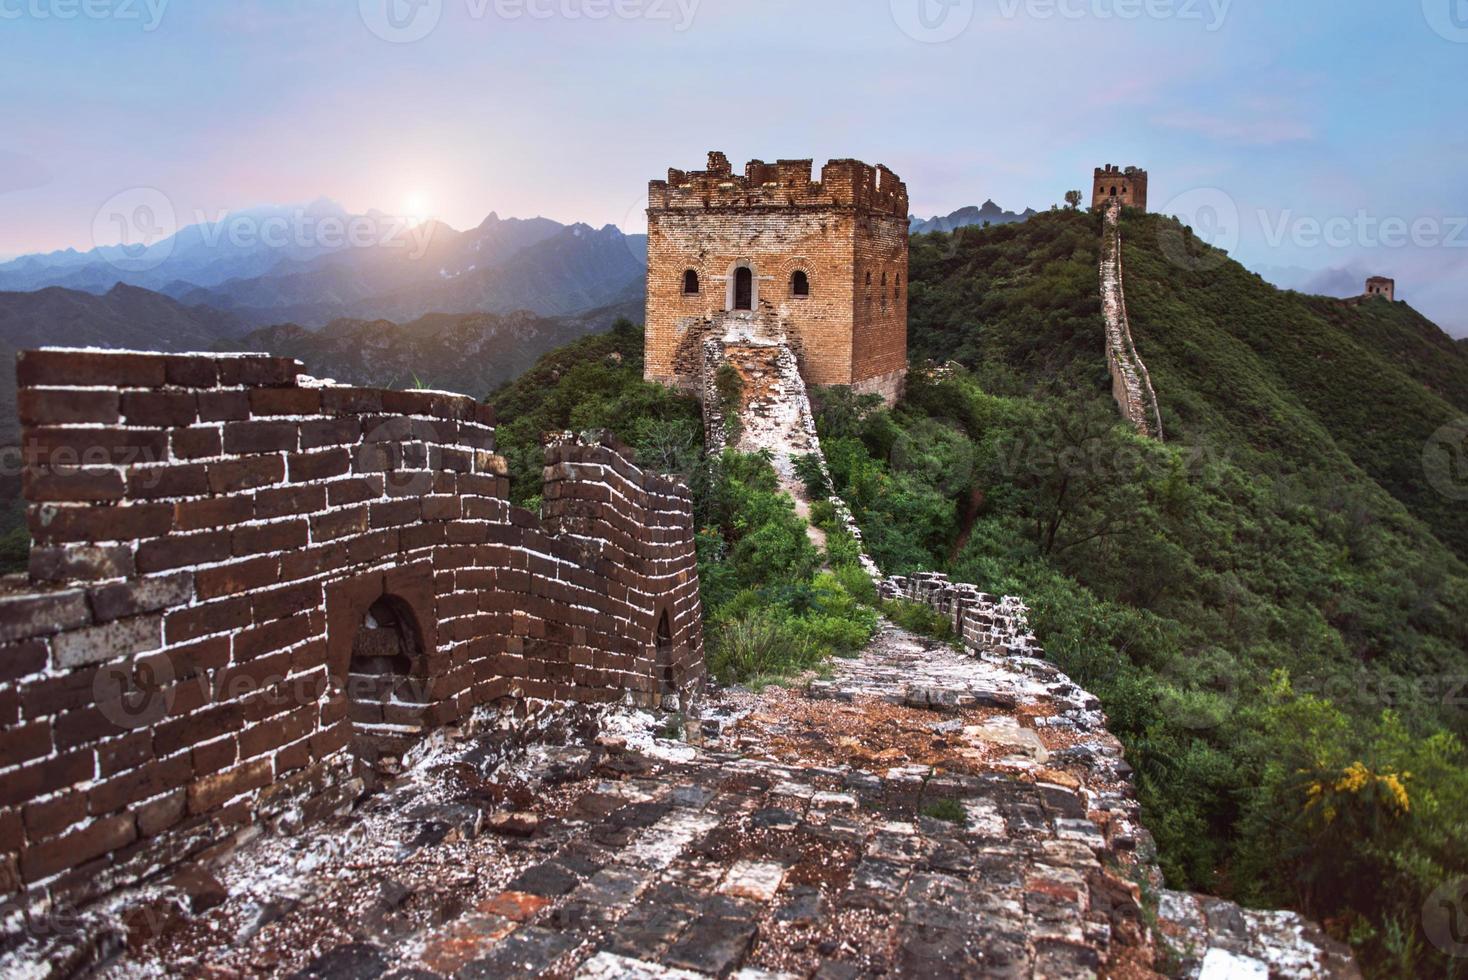 The Great wall of China- 7 wonder of the world. photo